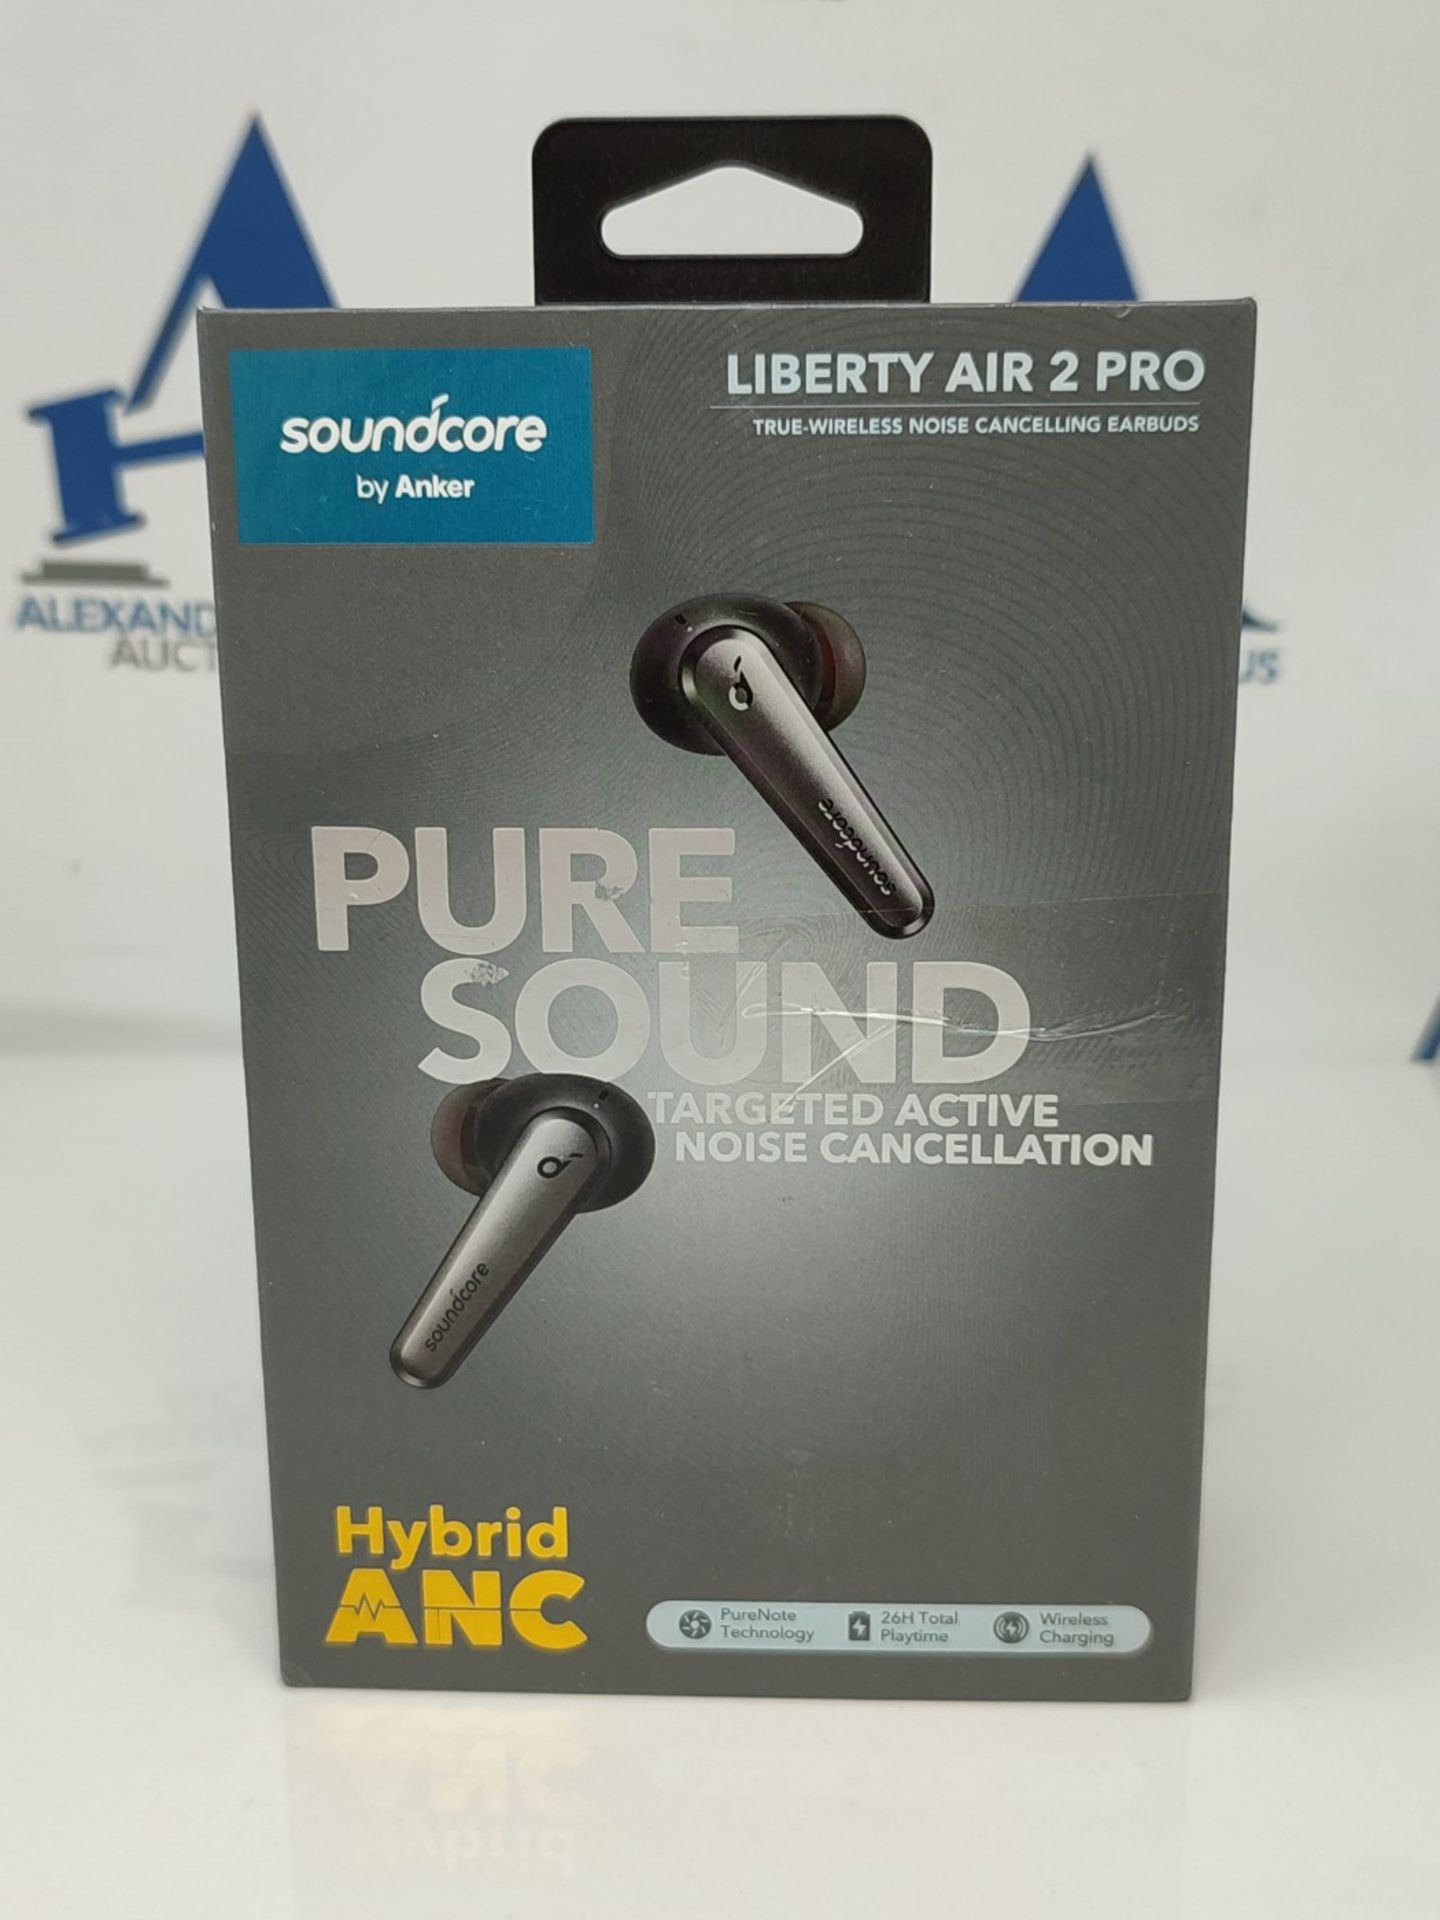 RRP £76.00 Soundcore True Wireless Earphones Liberty Air 2 Pro by Anker, targeted active noise ca - Image 5 of 6